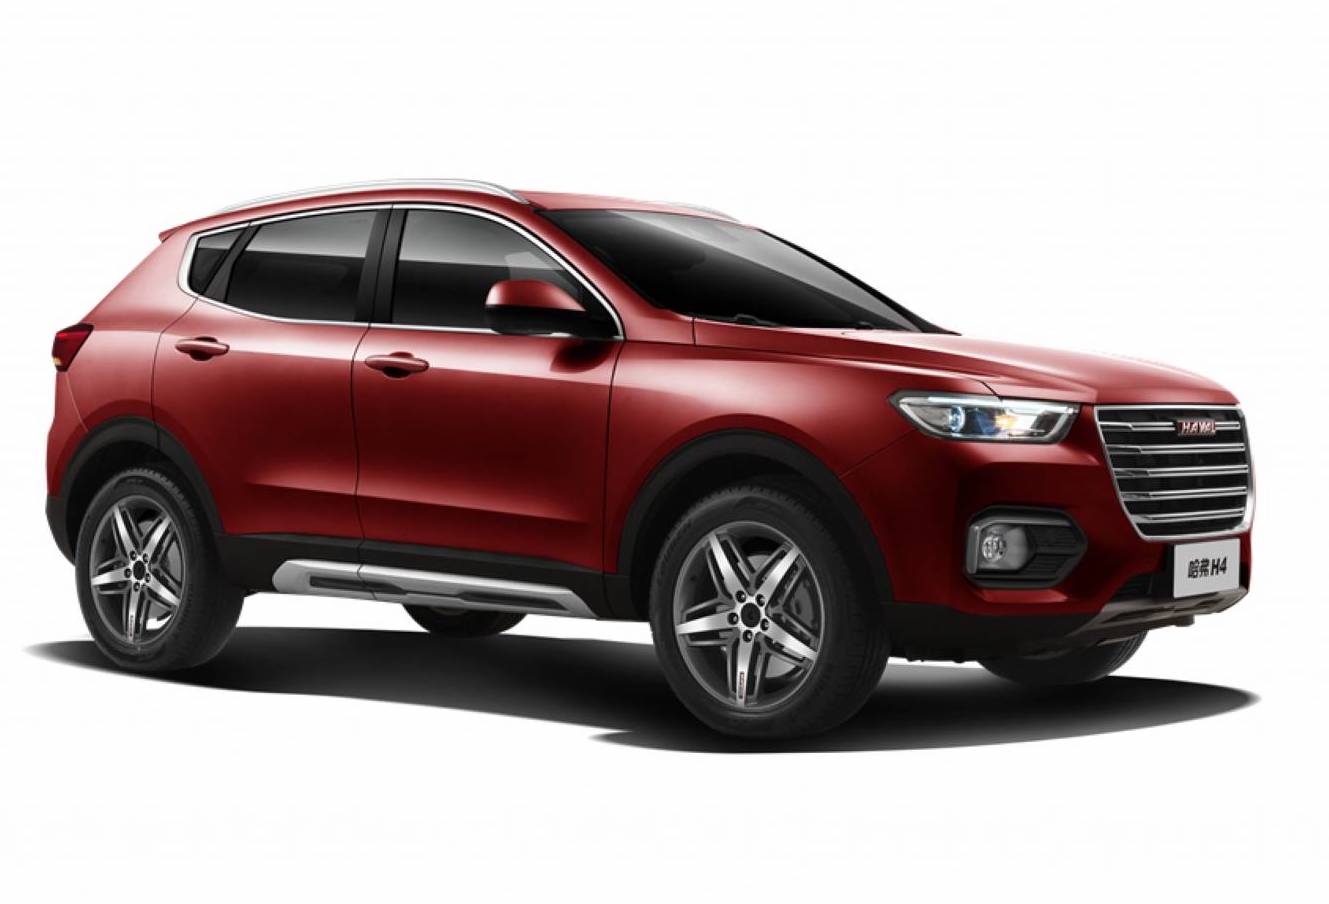 2018 Haval H4 medium-size SUV revealed, for China only